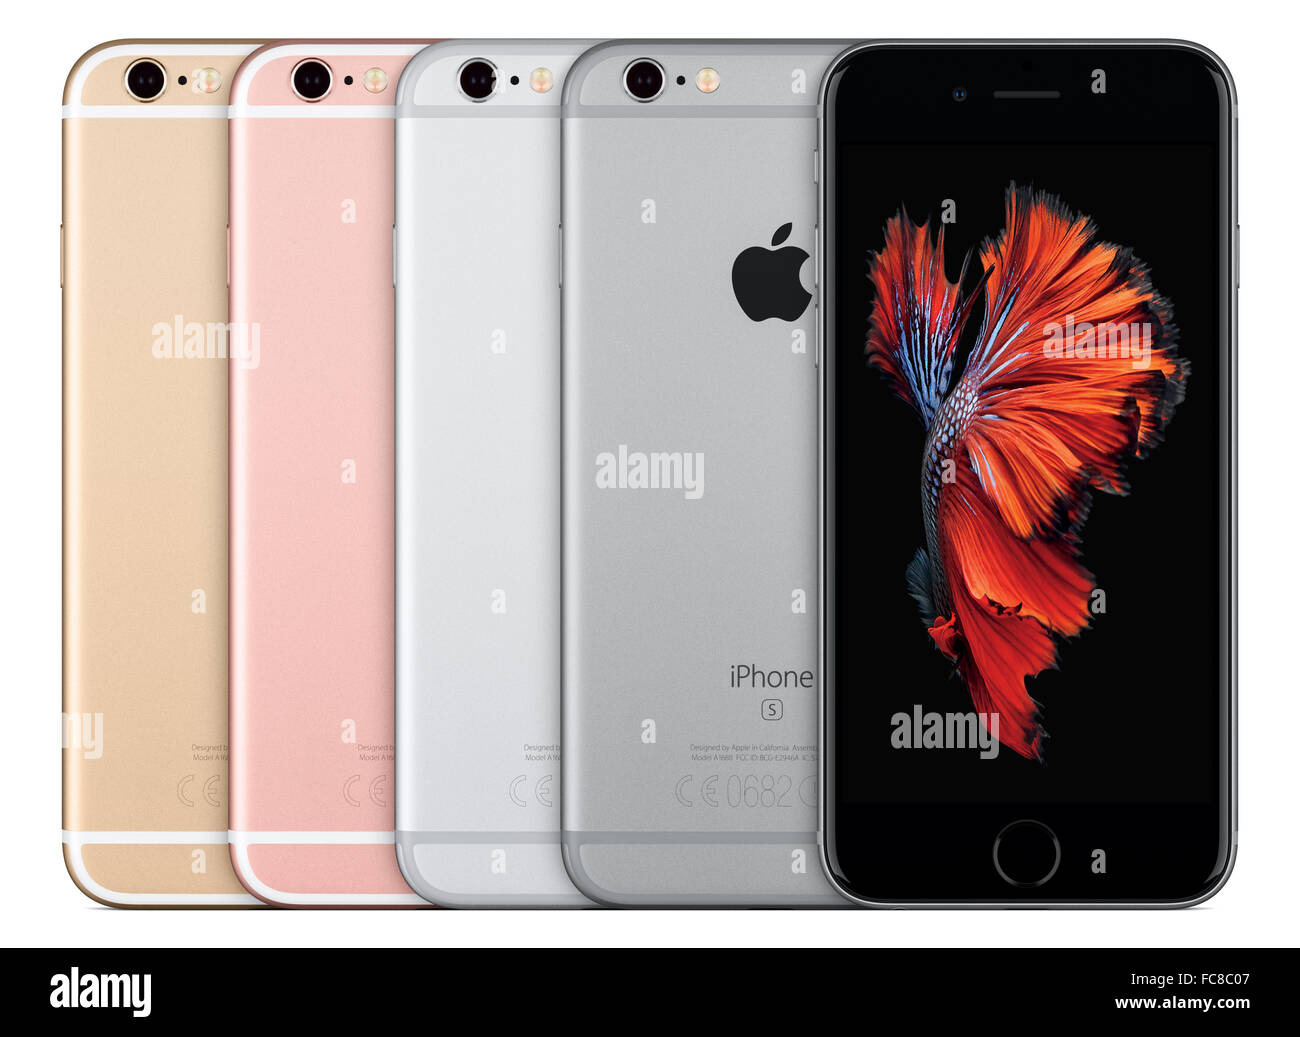 Varna, Bulgaria - October 24, 2015: Front view of Apple iPhone 6S. All colors concept: Silver, Space Gray, Gold, Rose Gold Stock Photo